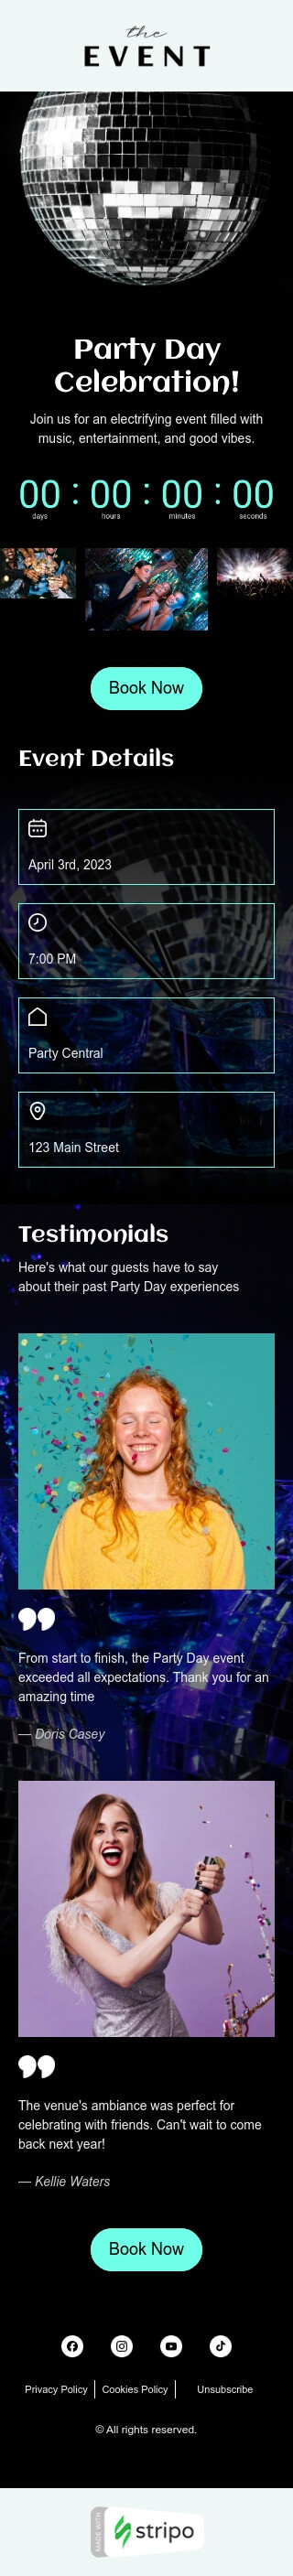 Party Day email template "Unforgettable Party Day" for hobbies industry mobile view